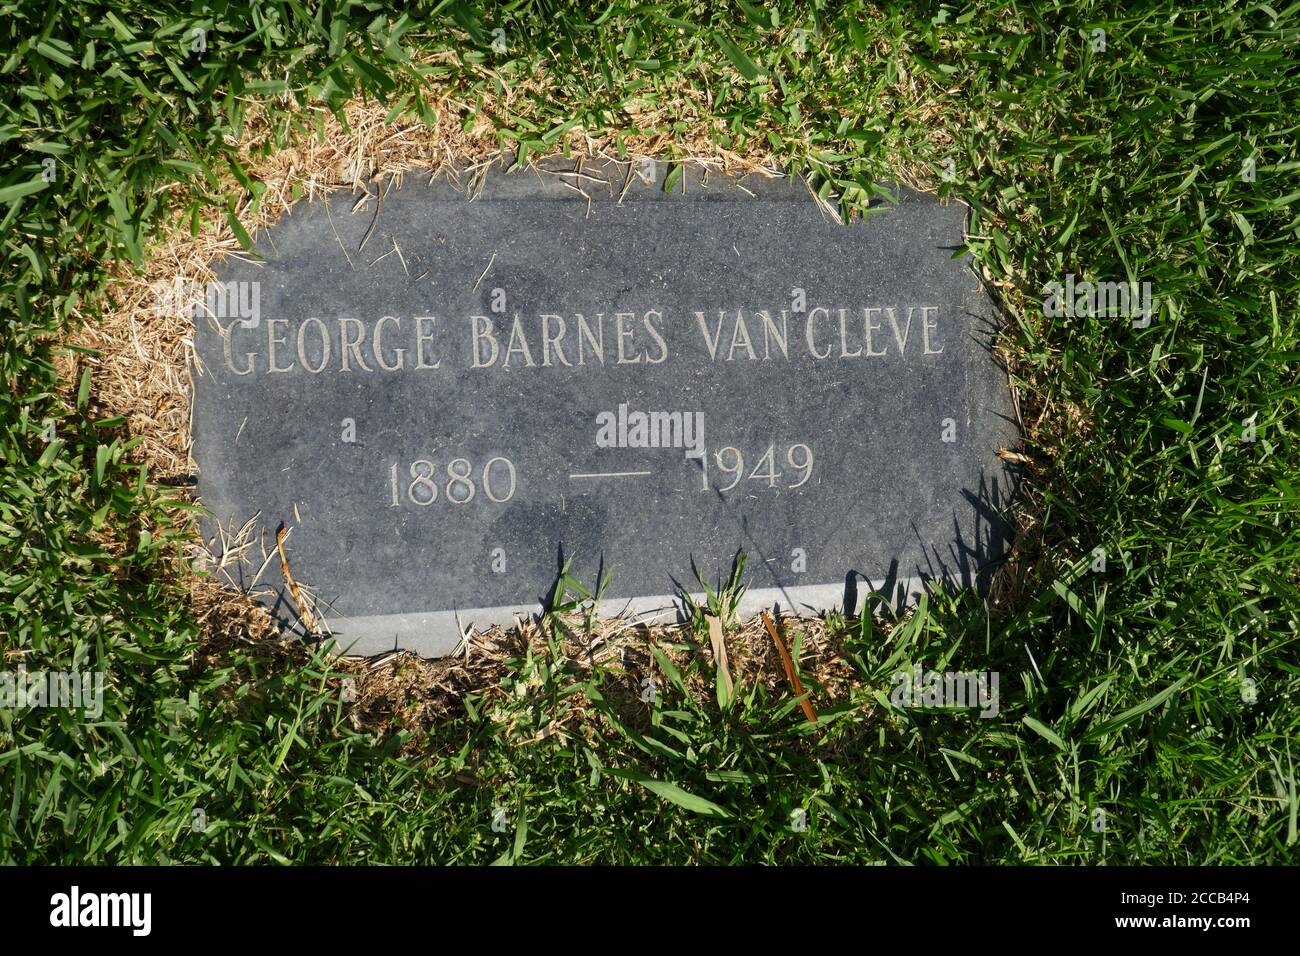 Hollywood, California, USA 17th August 2020 A general view of atmosphere of George Barnes Van Cleve's Grave at Hollywood Forever Cemetery on August 17, 2020 in Hollywood, California, USA. Photo by Barry King/Alamy Stock Photo Stock Photo